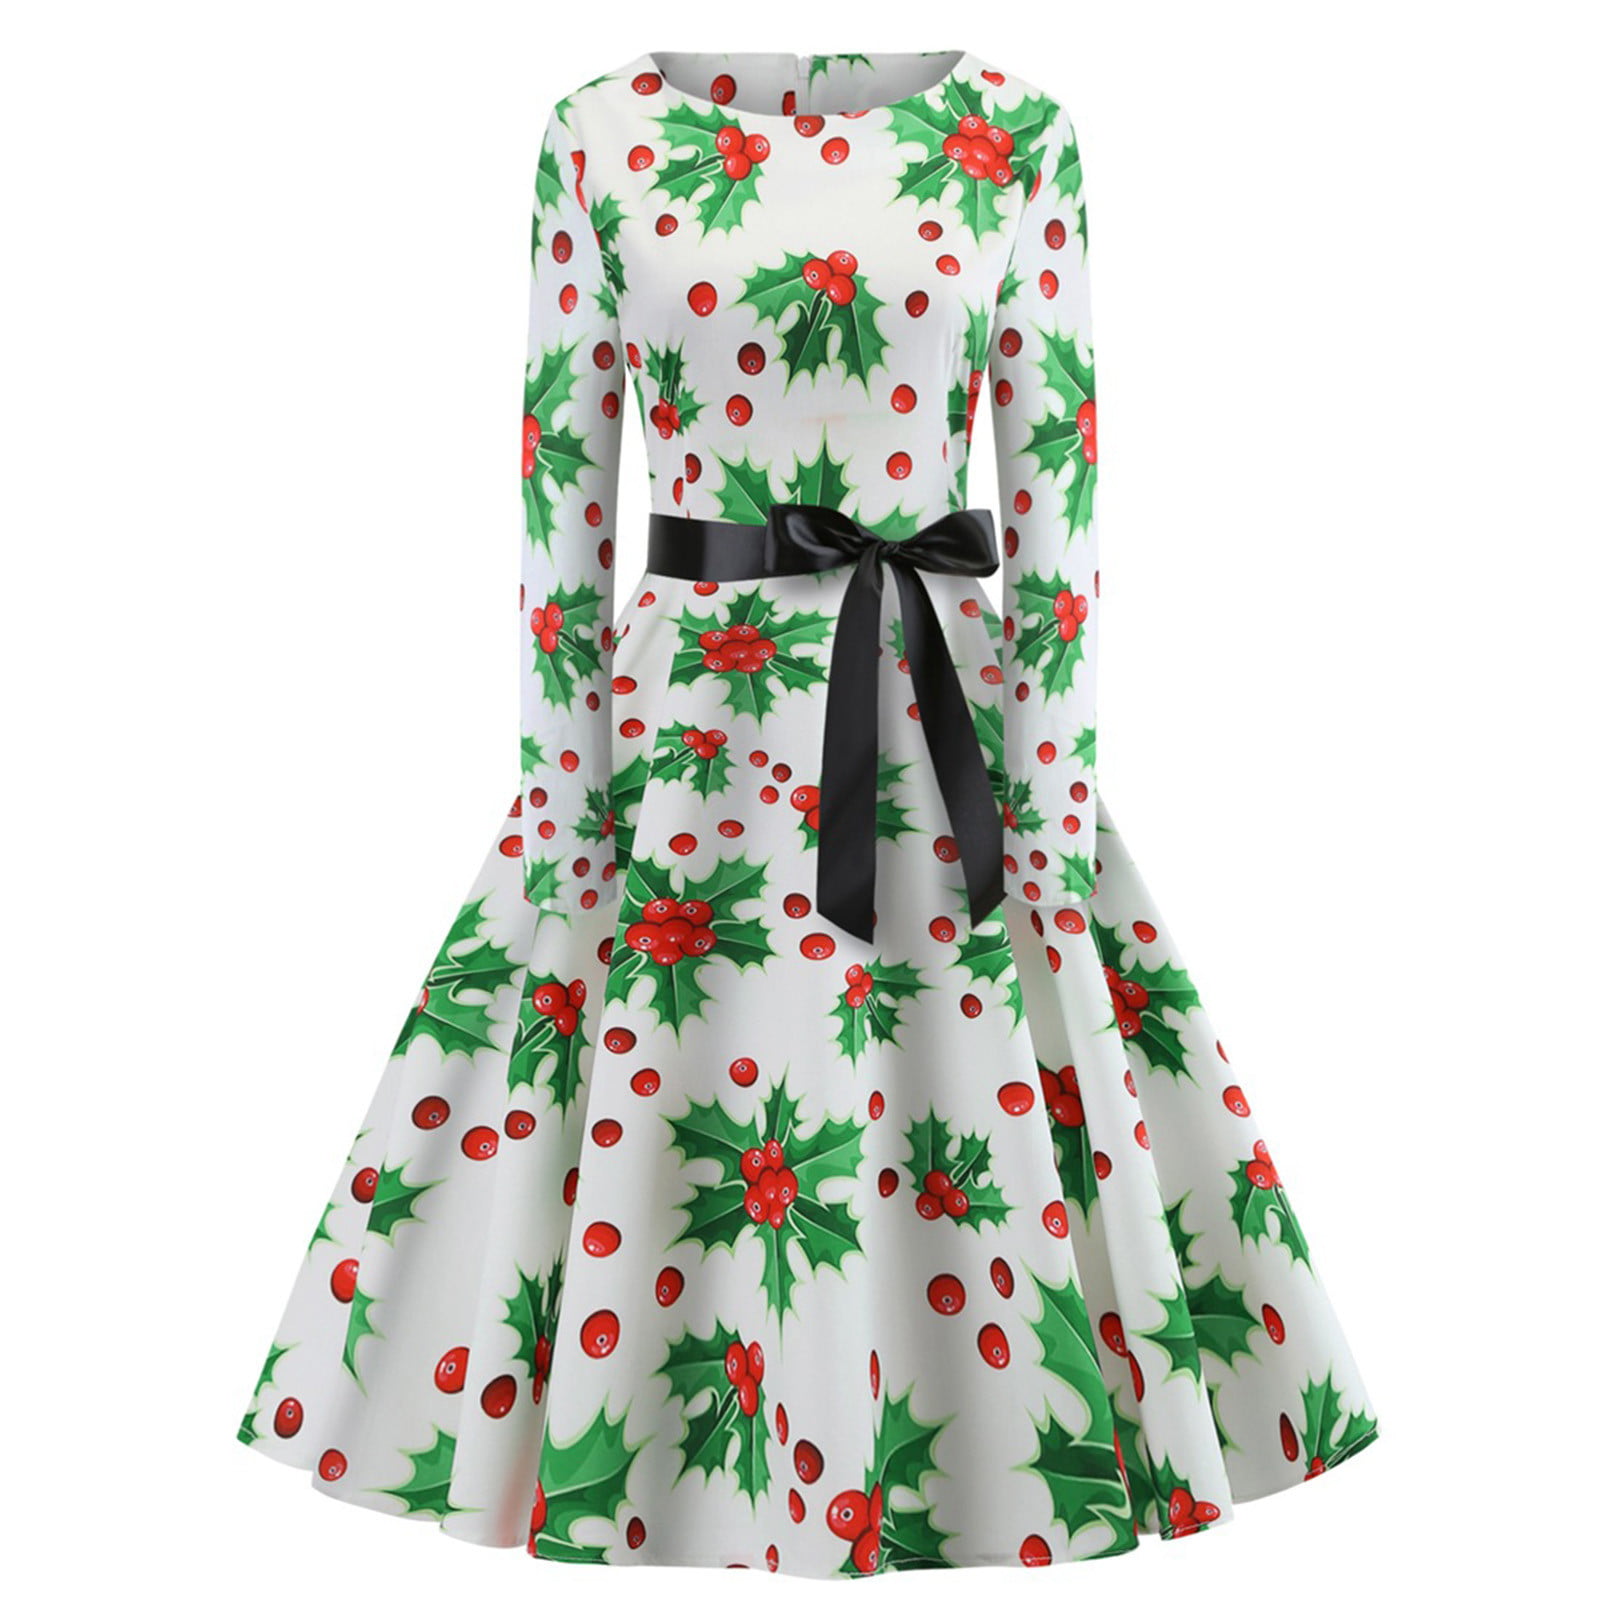 Womens Christmas Vintage Printed Dress XL, Green Ladies 1950s Retro Cocktail Party Dresses Long Sleeve Casual Aline Mid Dress